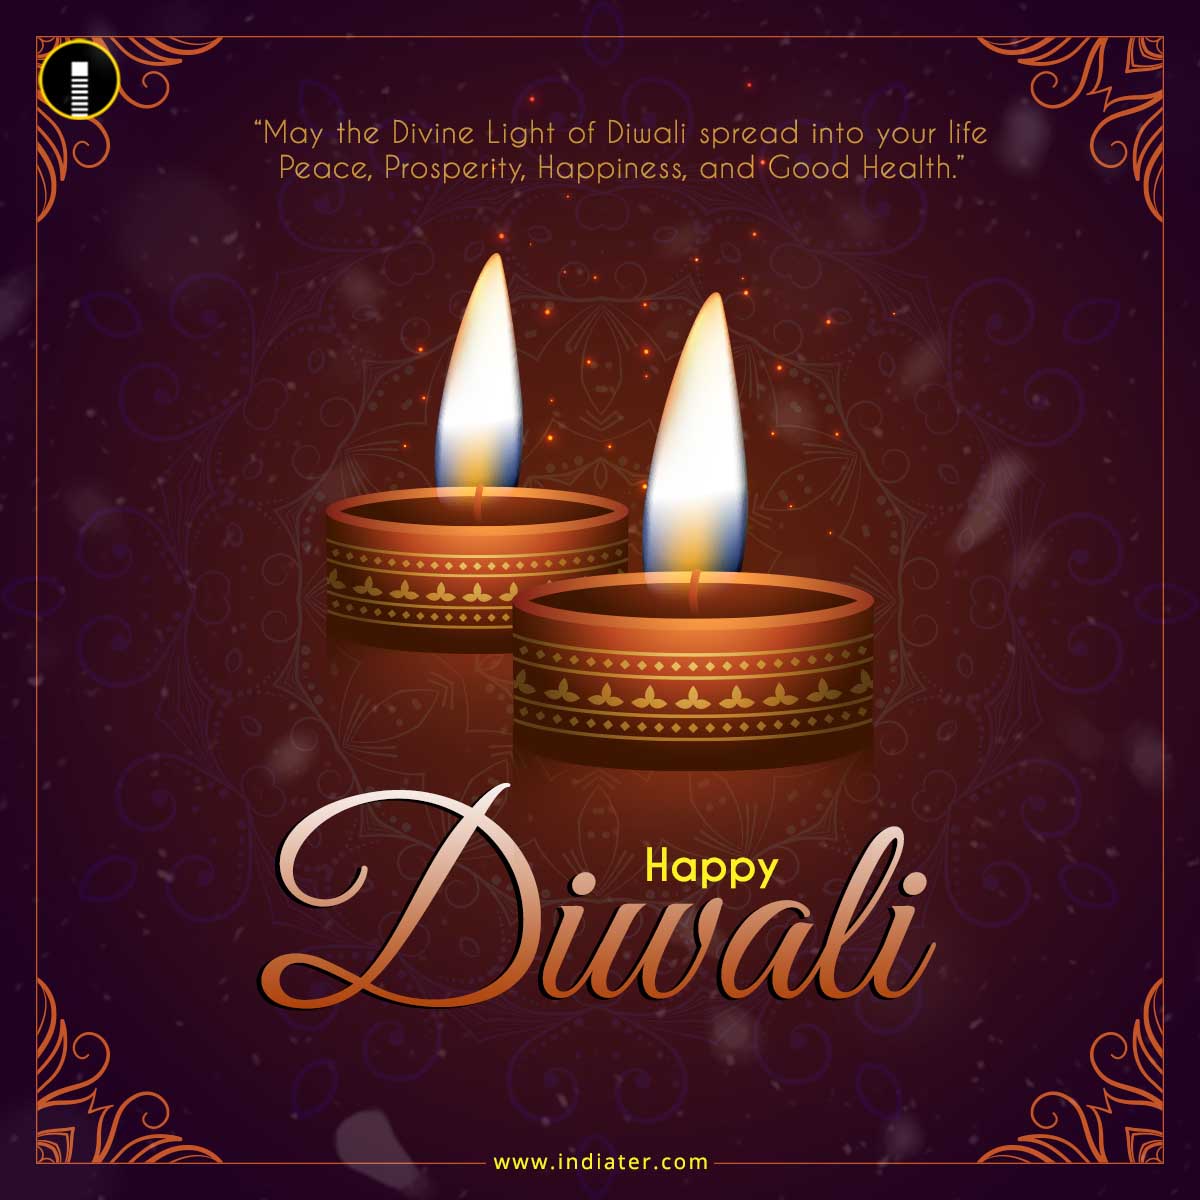 happy-diwali-wishes-greetings-free-download-with-quotes